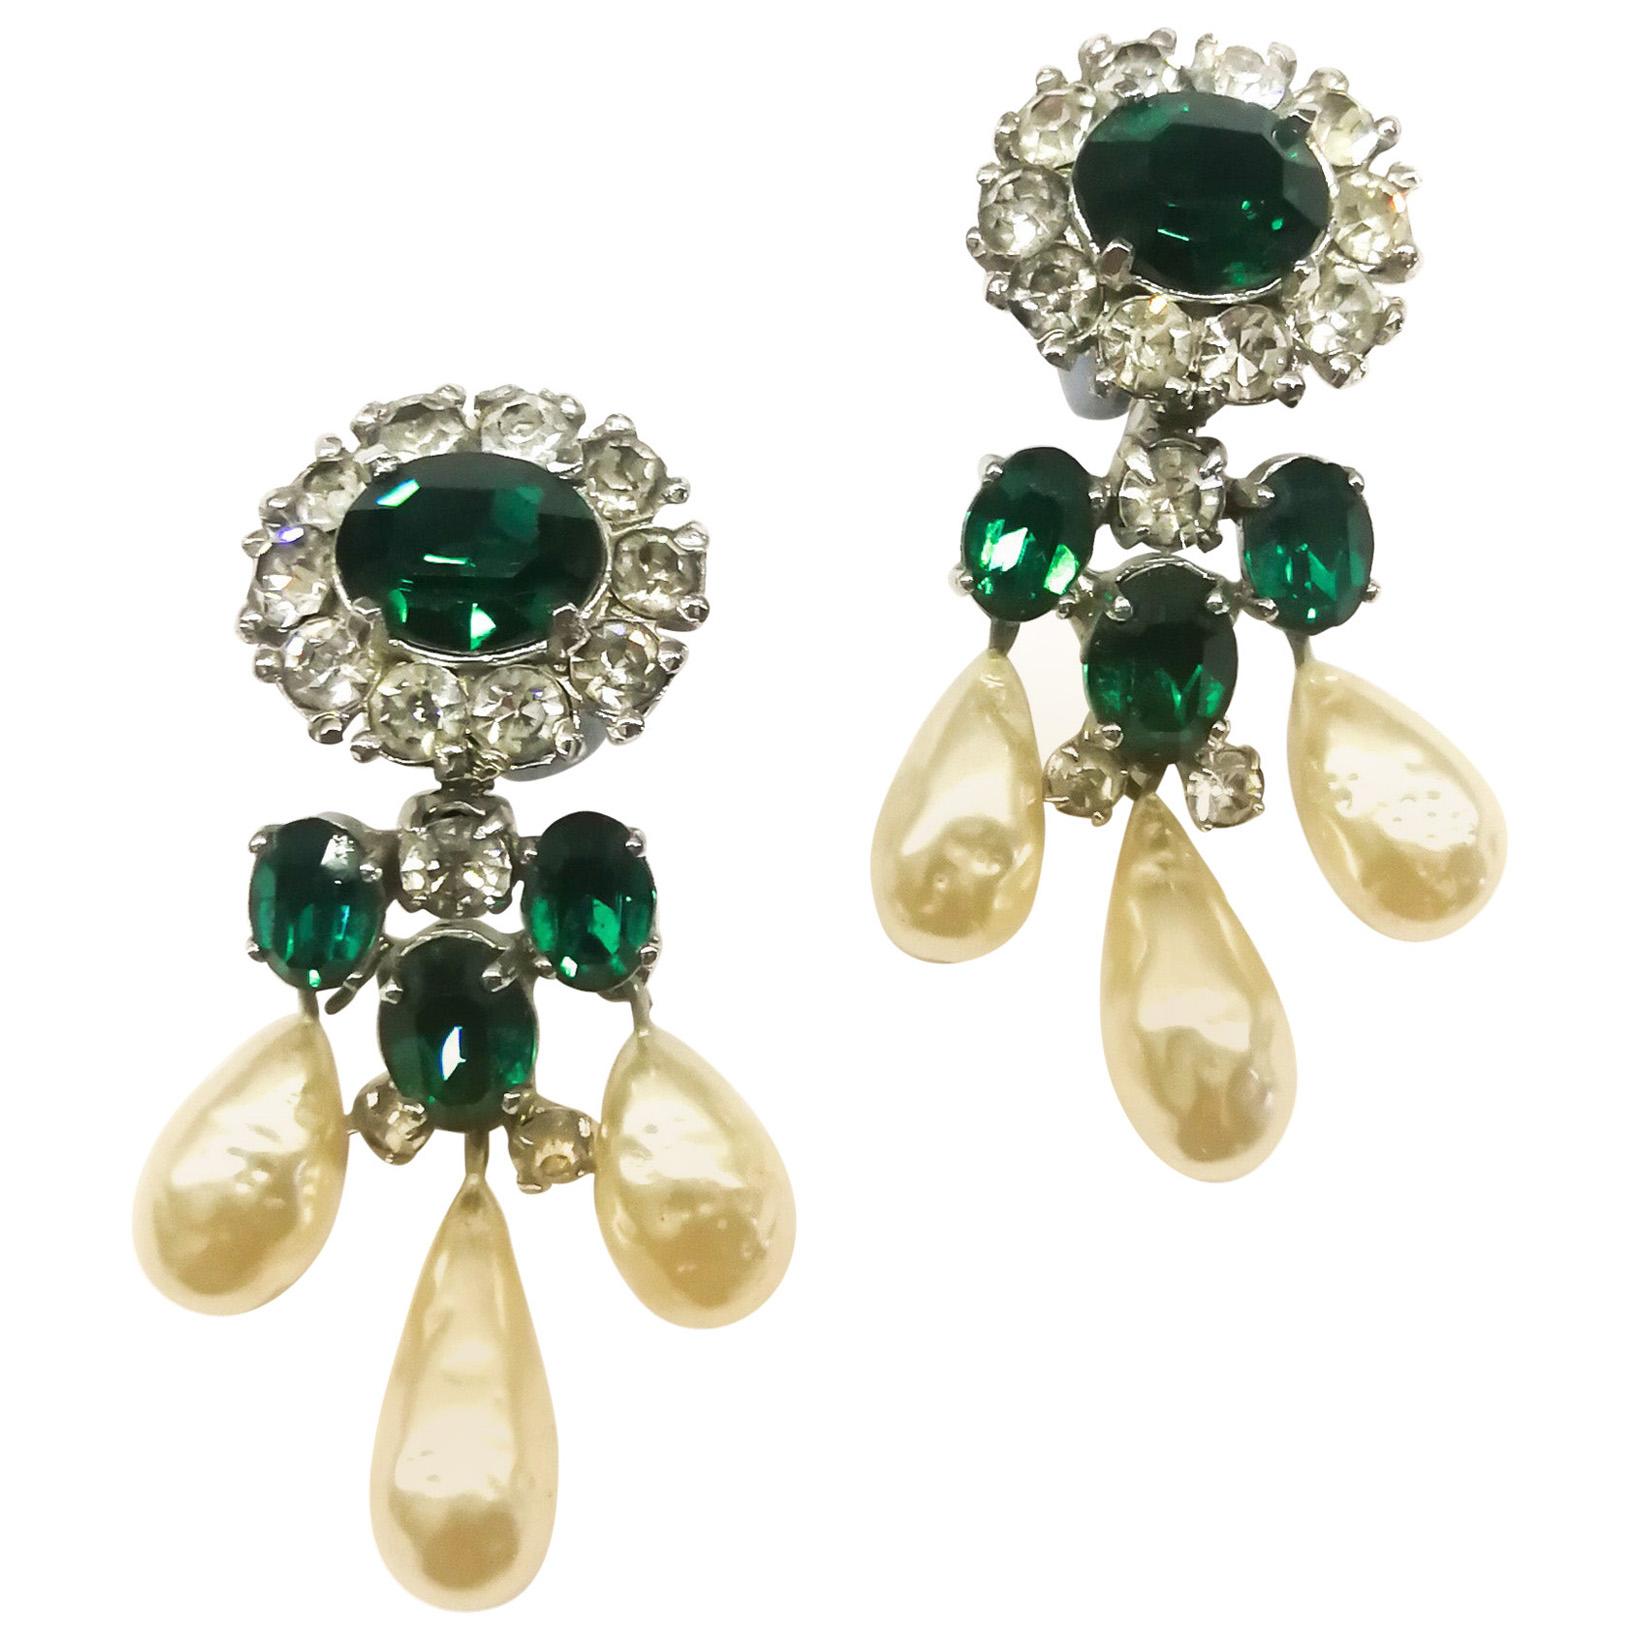 Baroque pearl, emerald paste drop earrings, Christian Dior by Mitchel Maer, 1950s